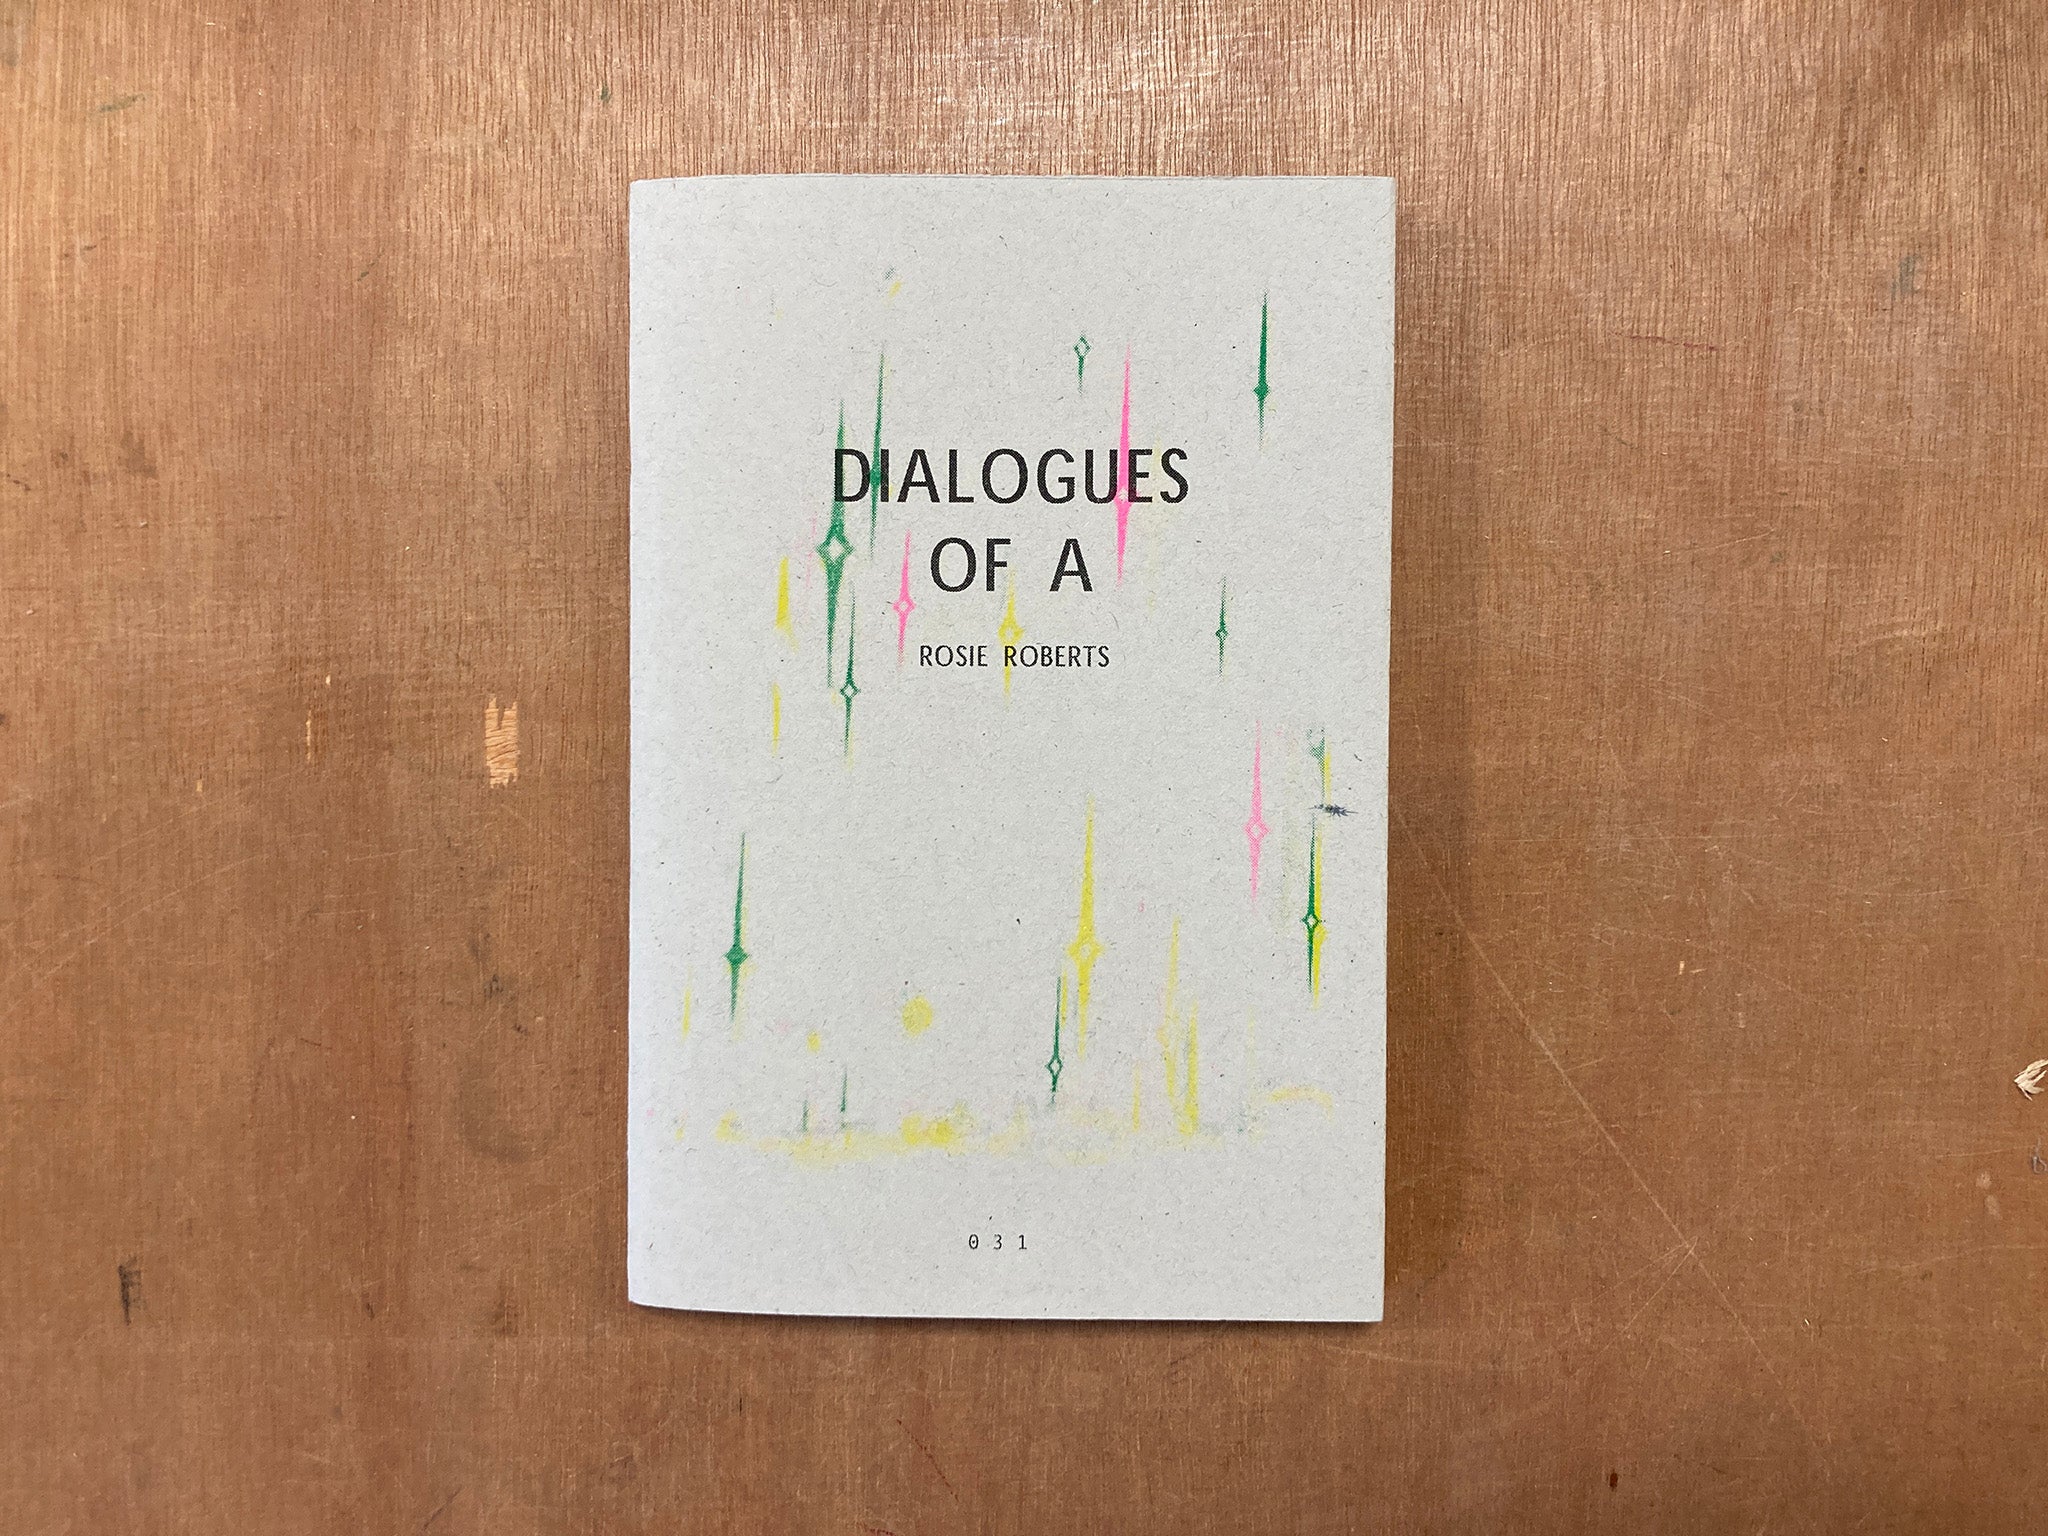 DIALOGUES OF A by Rosie Roberts